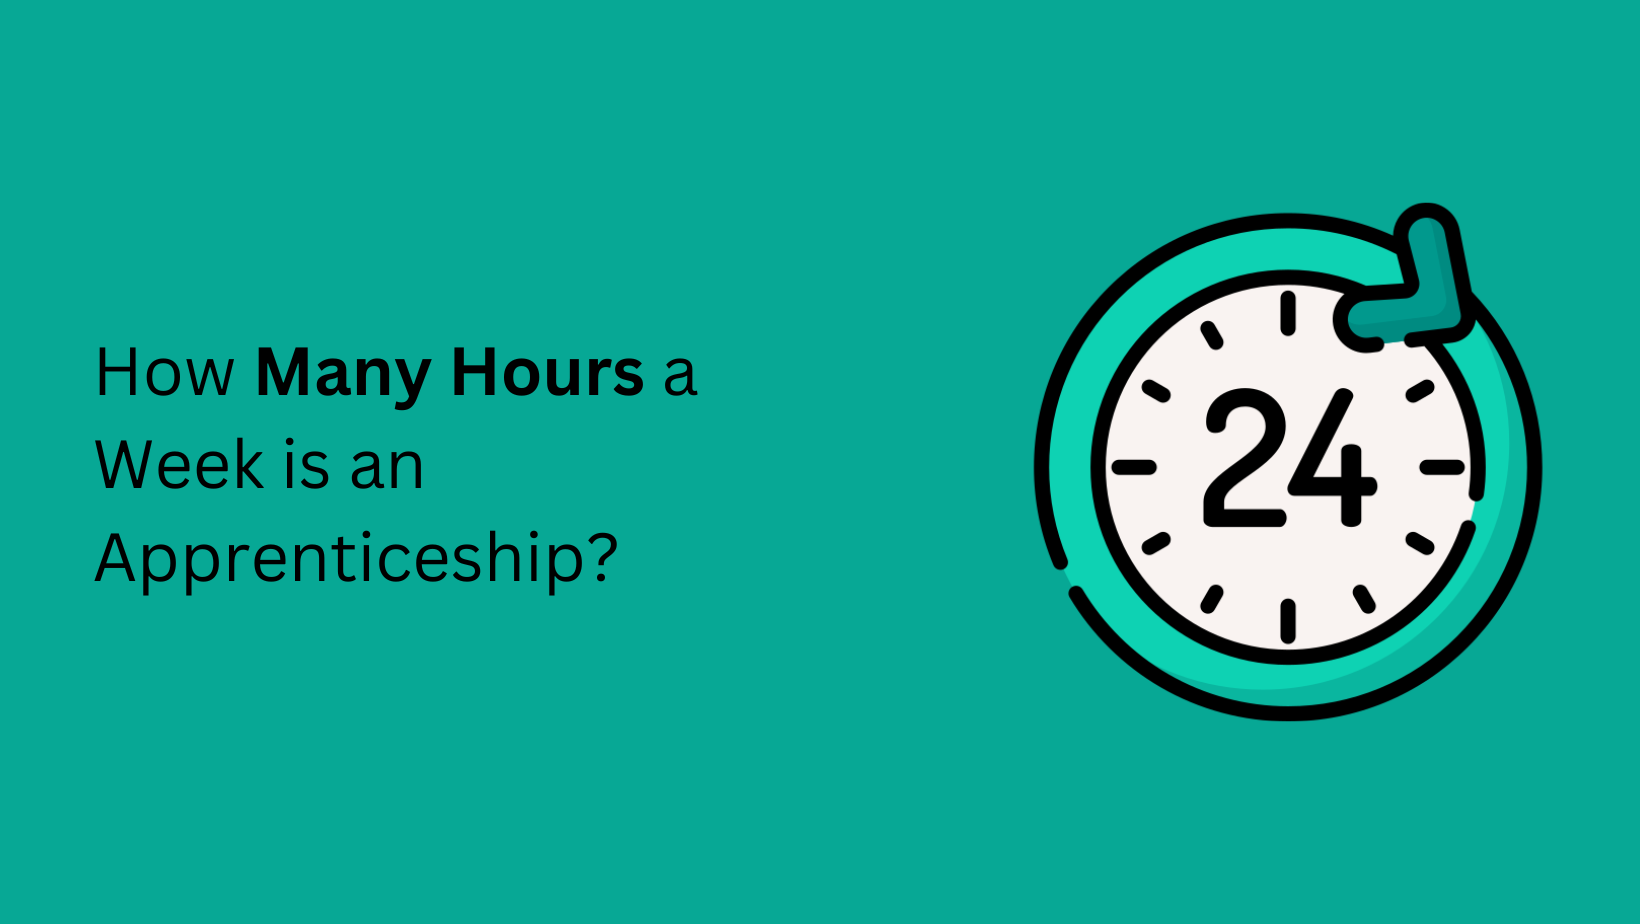 How Many Hours a Week is an Apprenticeship